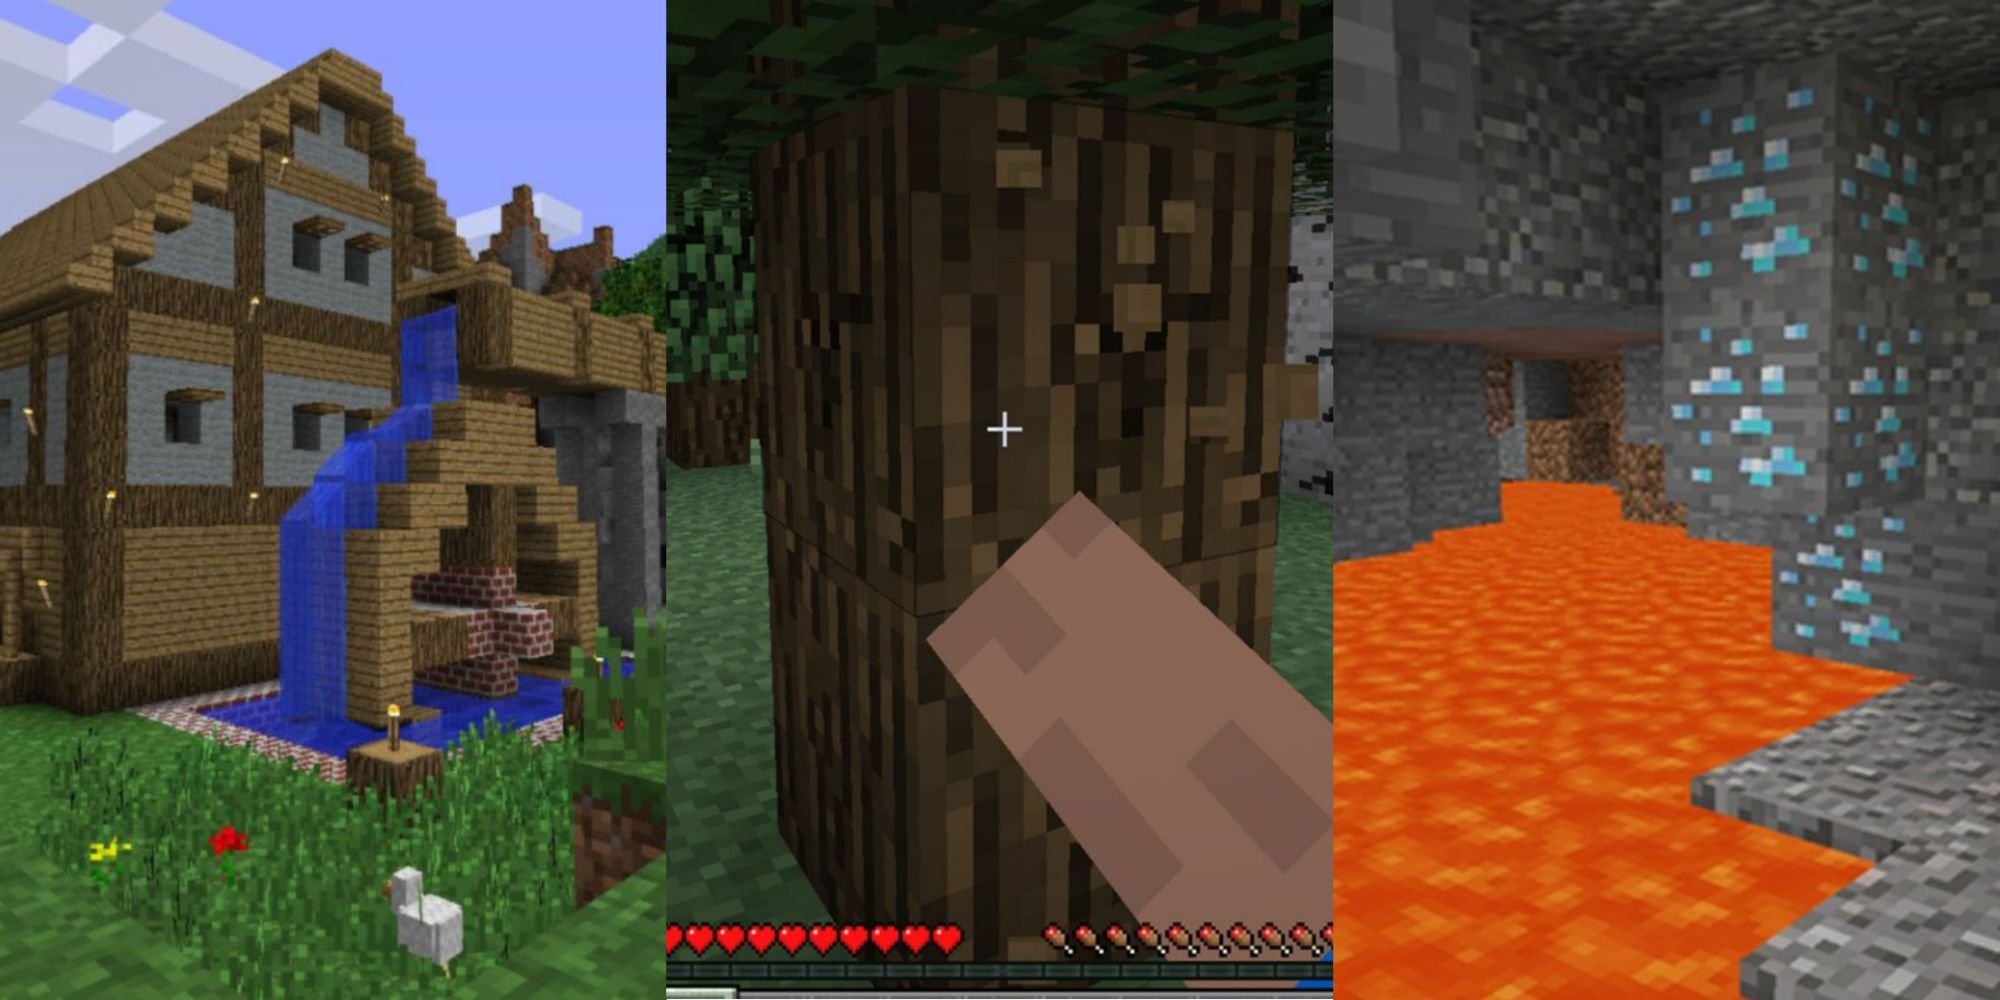 Split image of Minecraft moments, from chopping wood to making a house and exploring a lava filled area